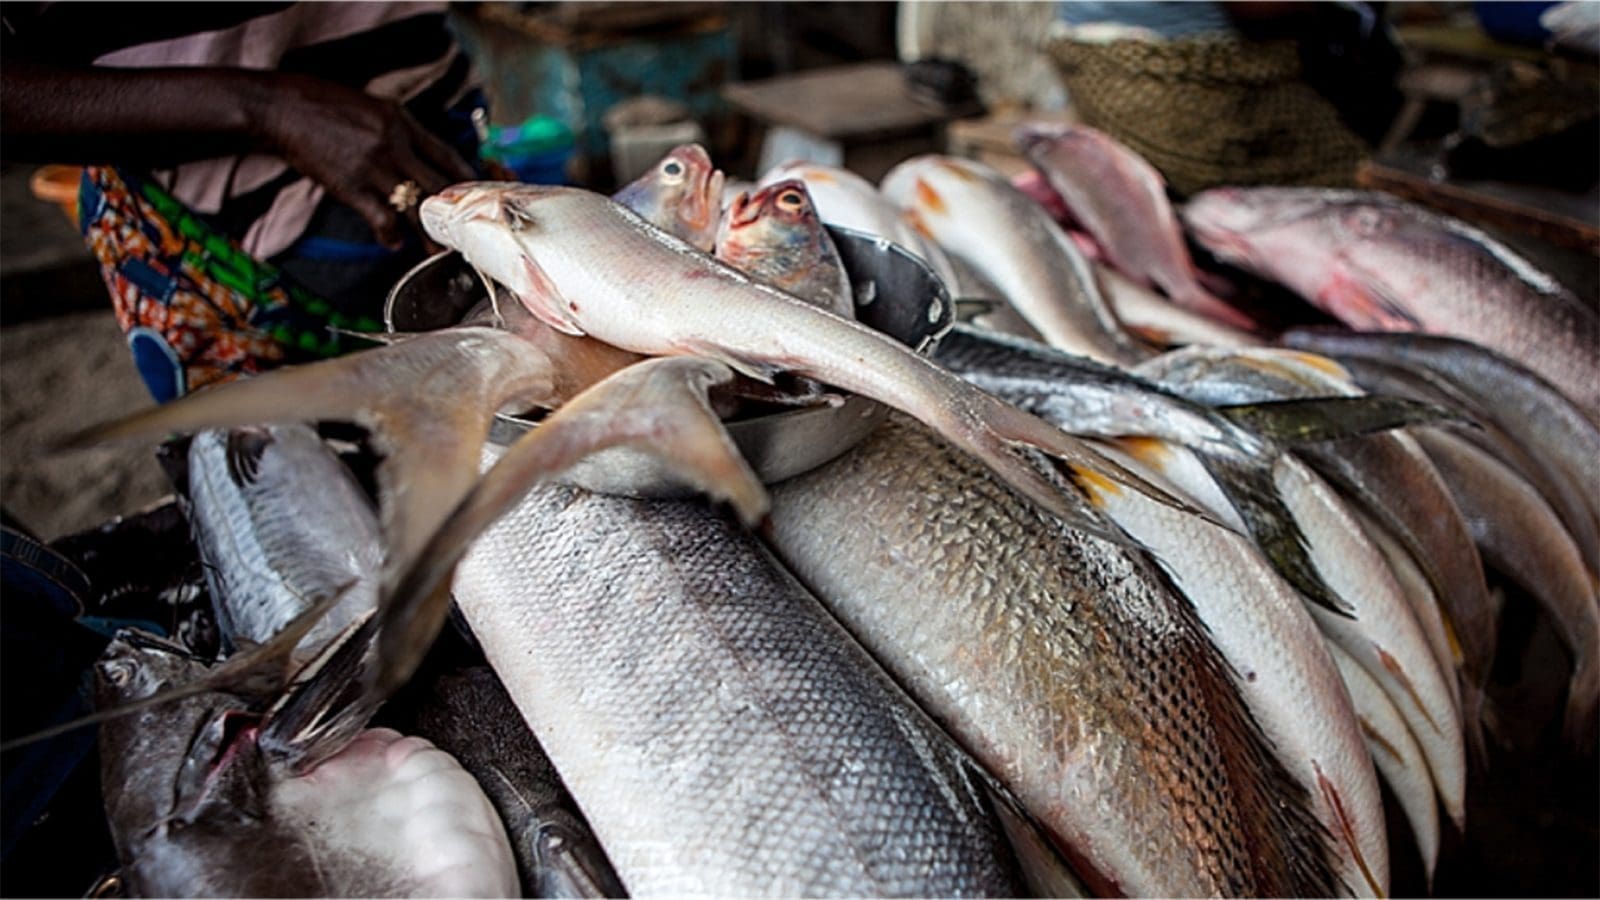 Government dispels claims of harmful chemicals used for preserving fish